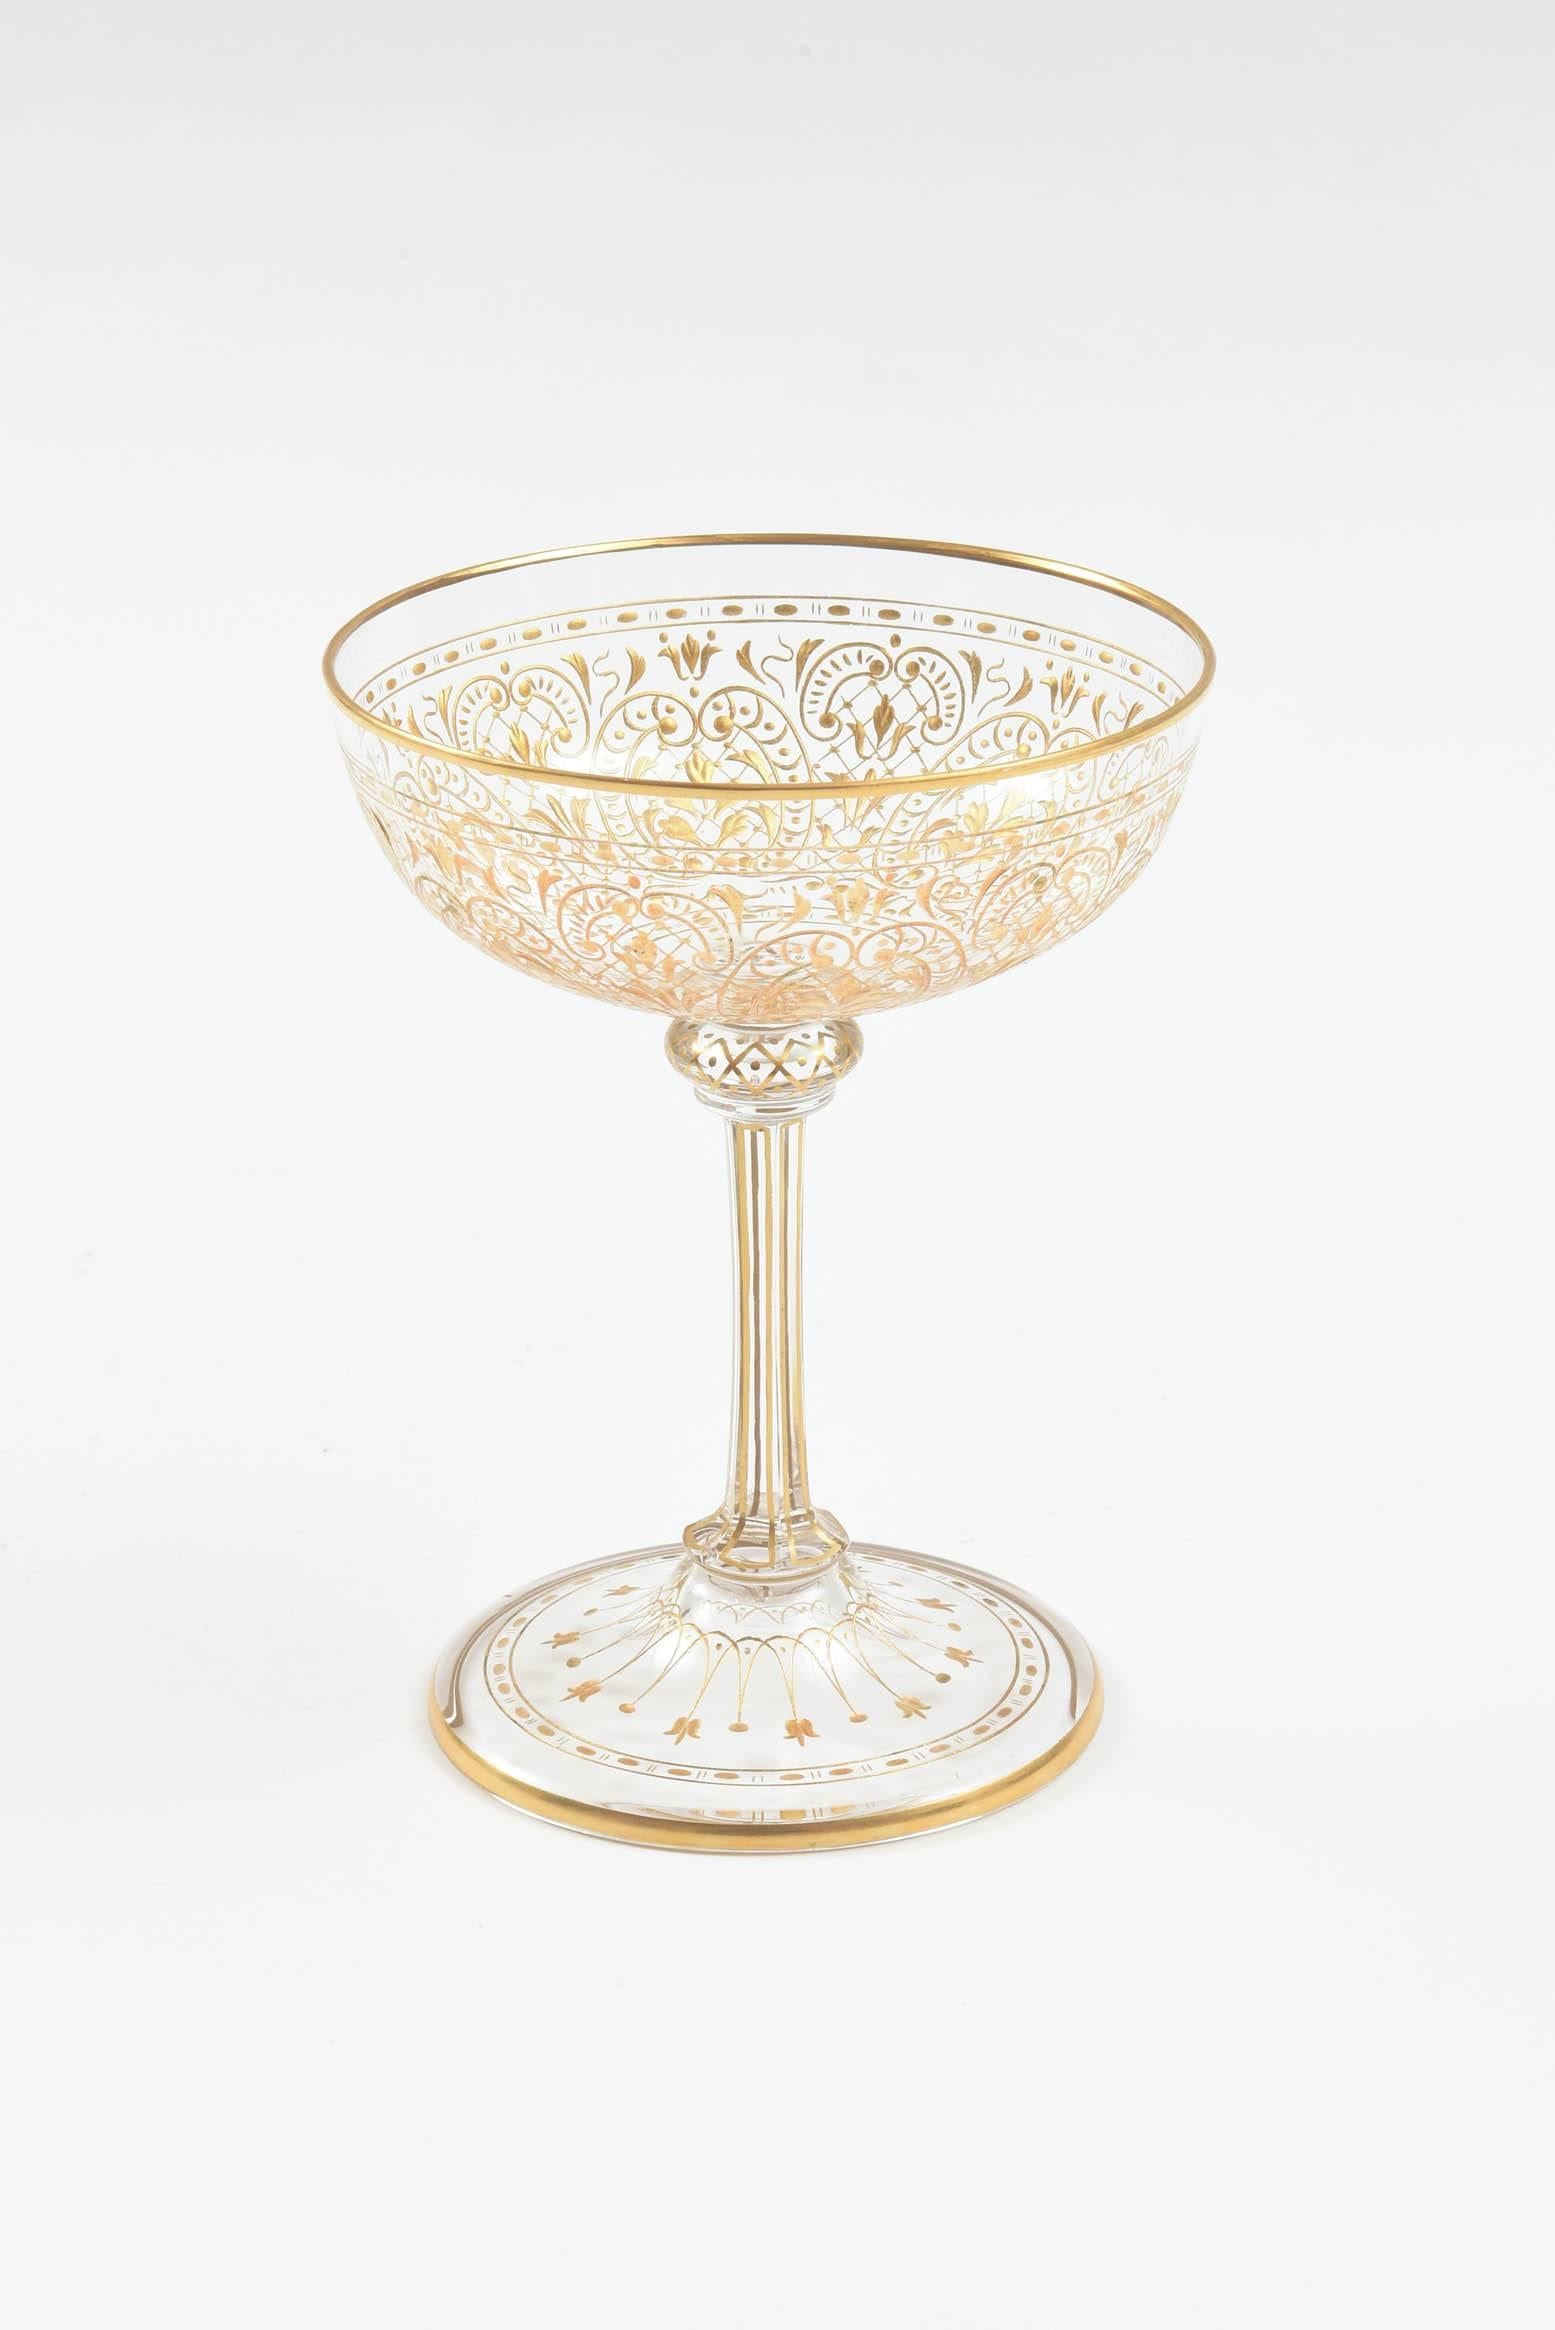 Hand-Crafted Extensive & Elaborate Gilt Crystal Stemware Service, Antique 19th Century 56 Pcs